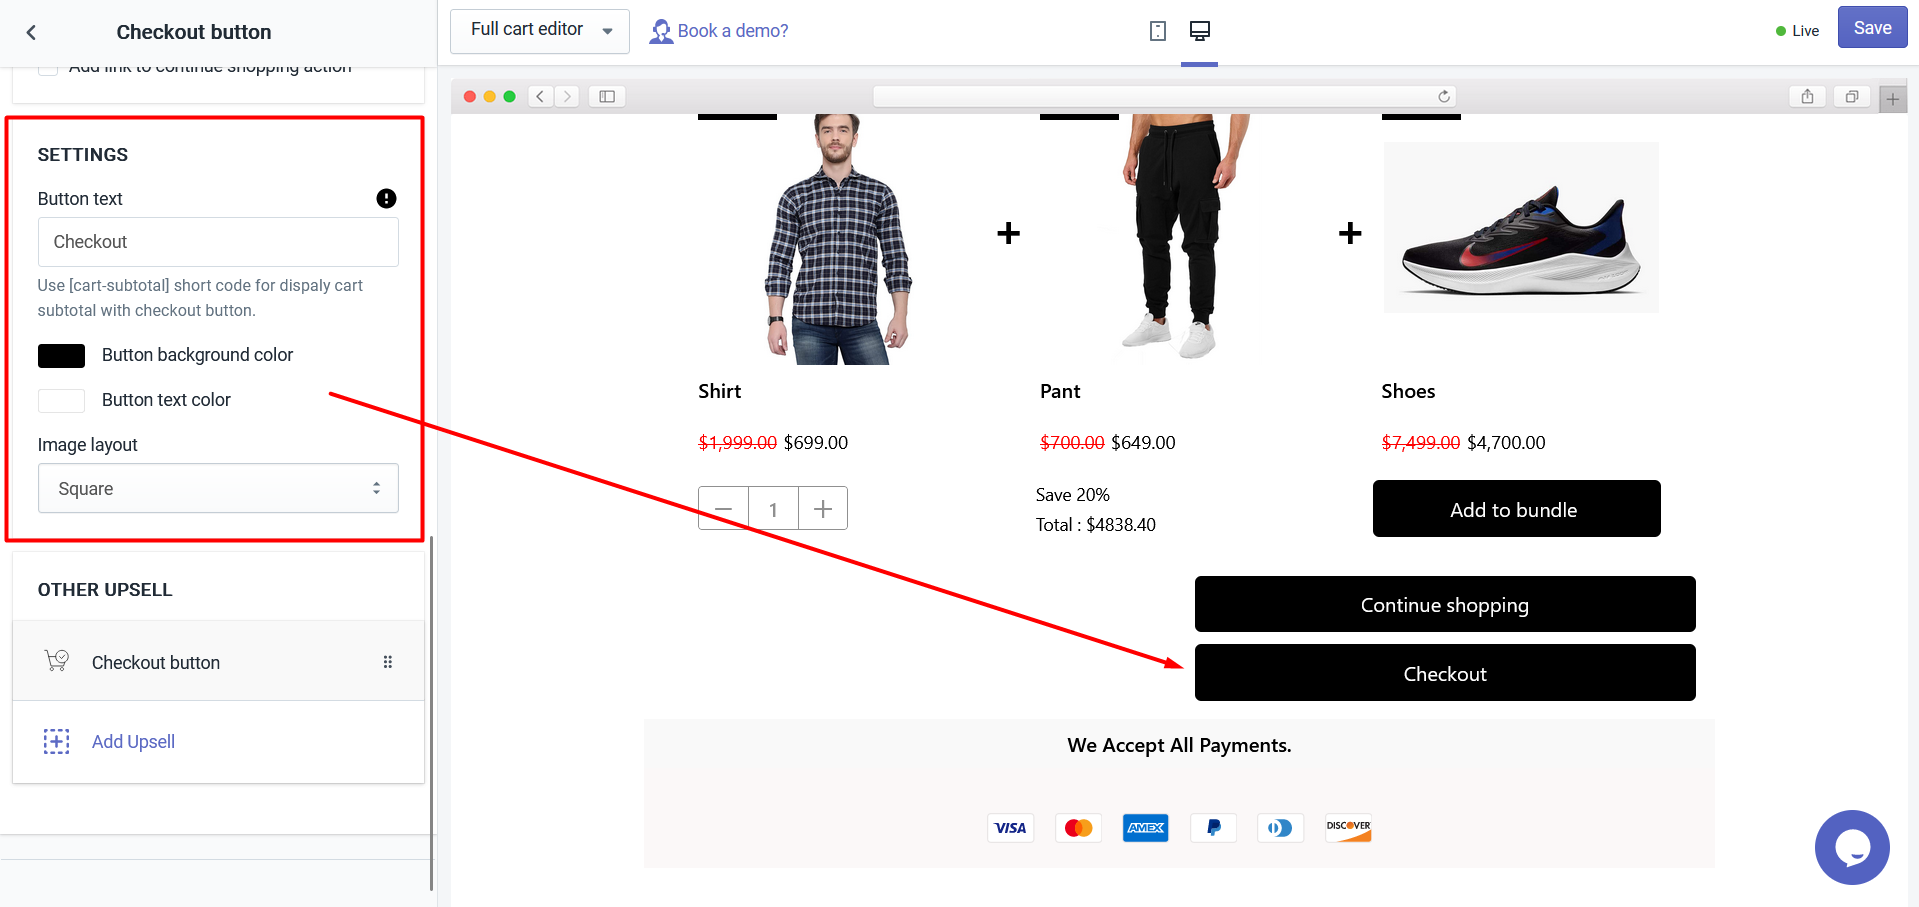 Checkout button settings - Best Upsell